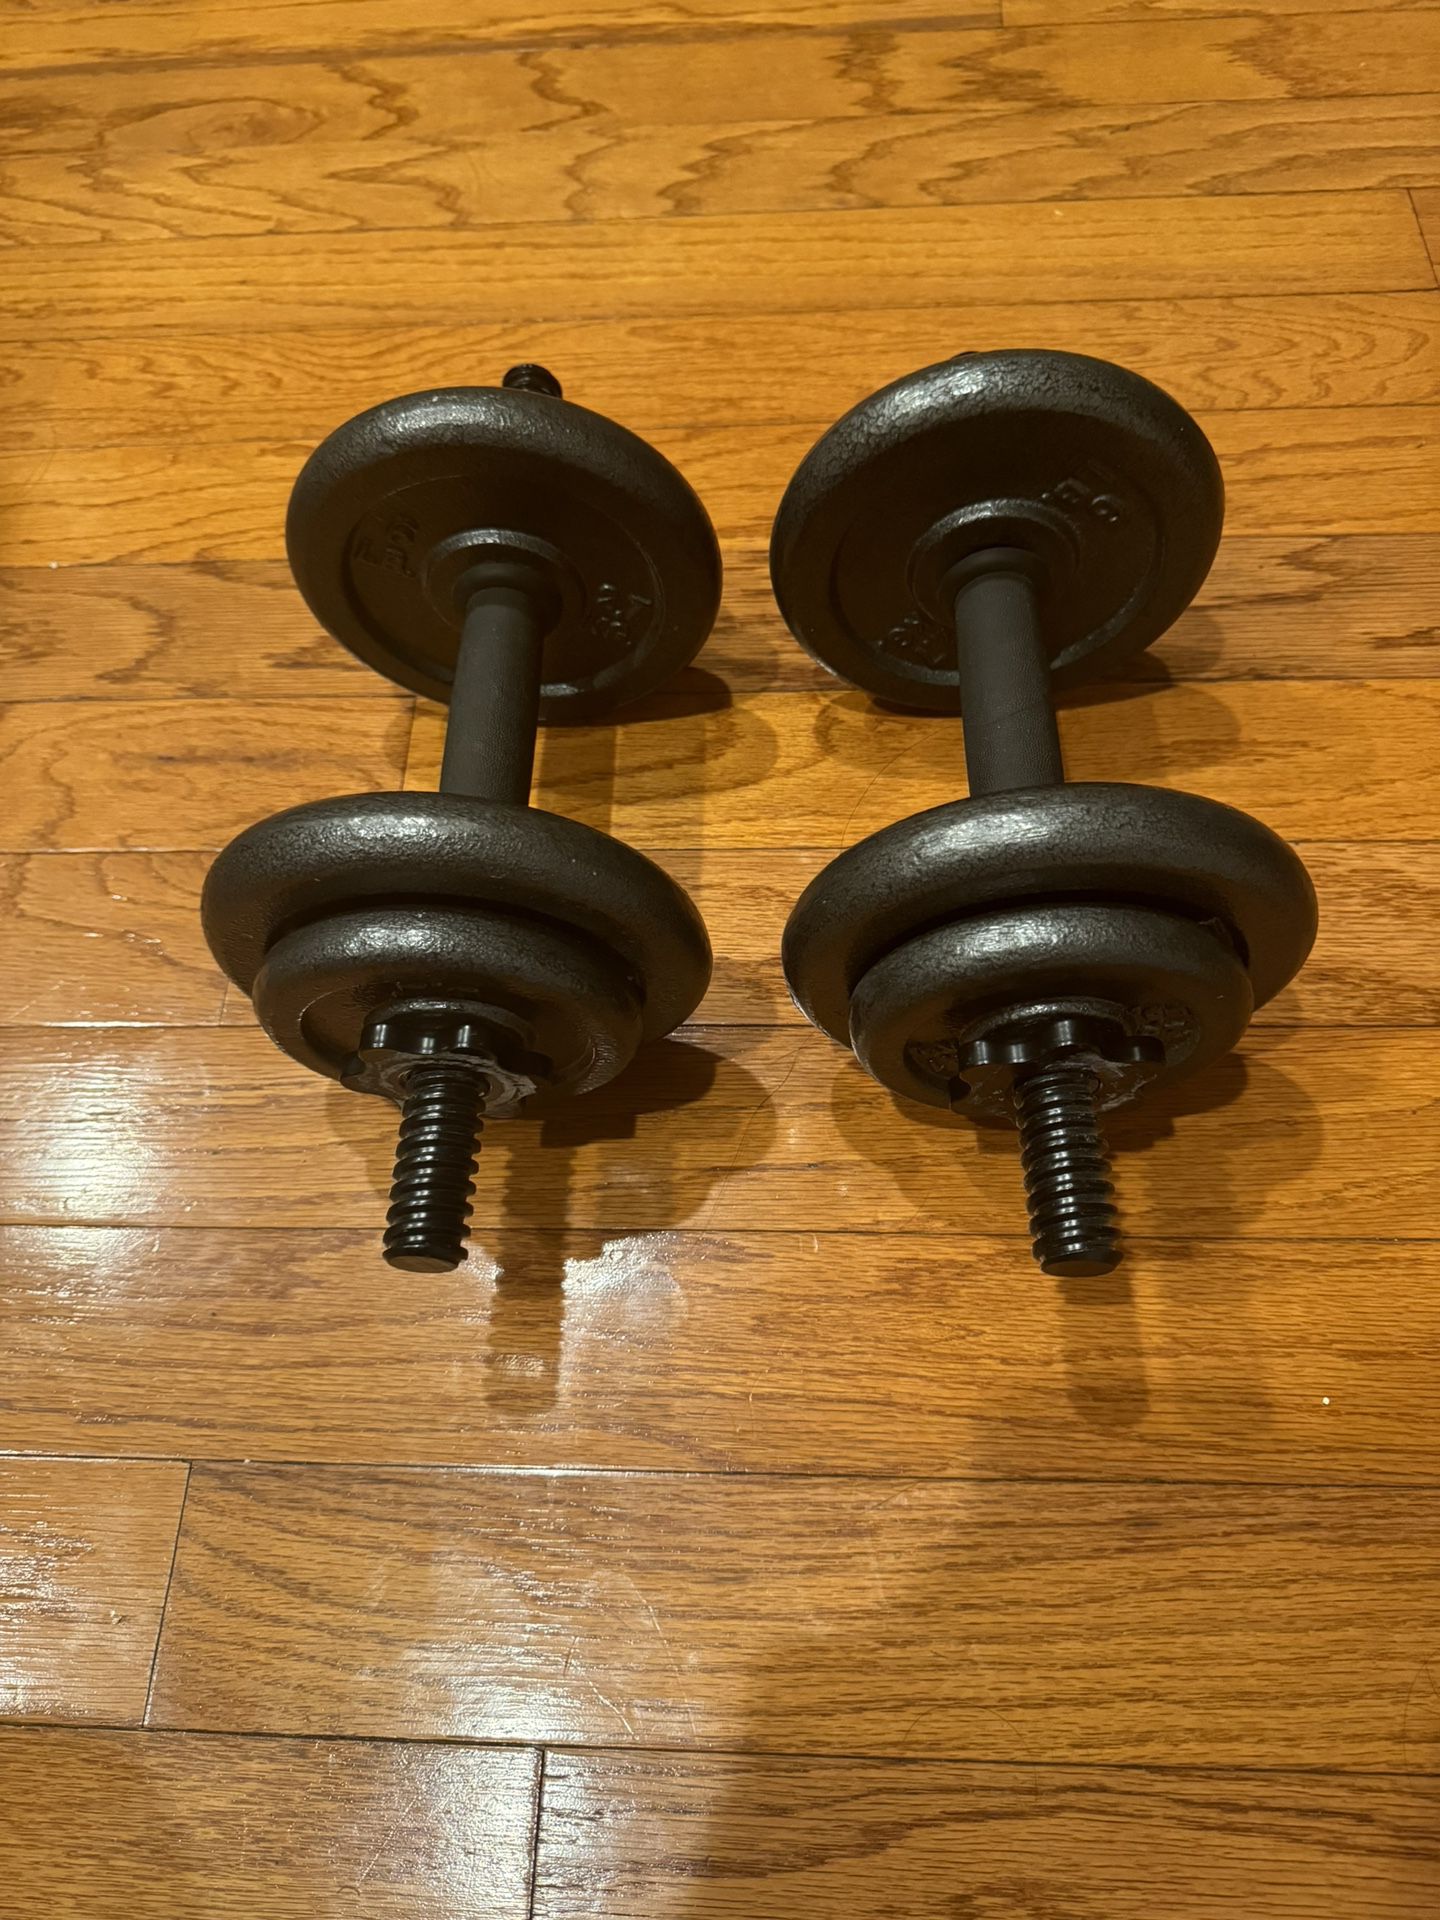 Adjustable Weight Plated Dumbells (4x 6lbs, 4x 2.5lbs)